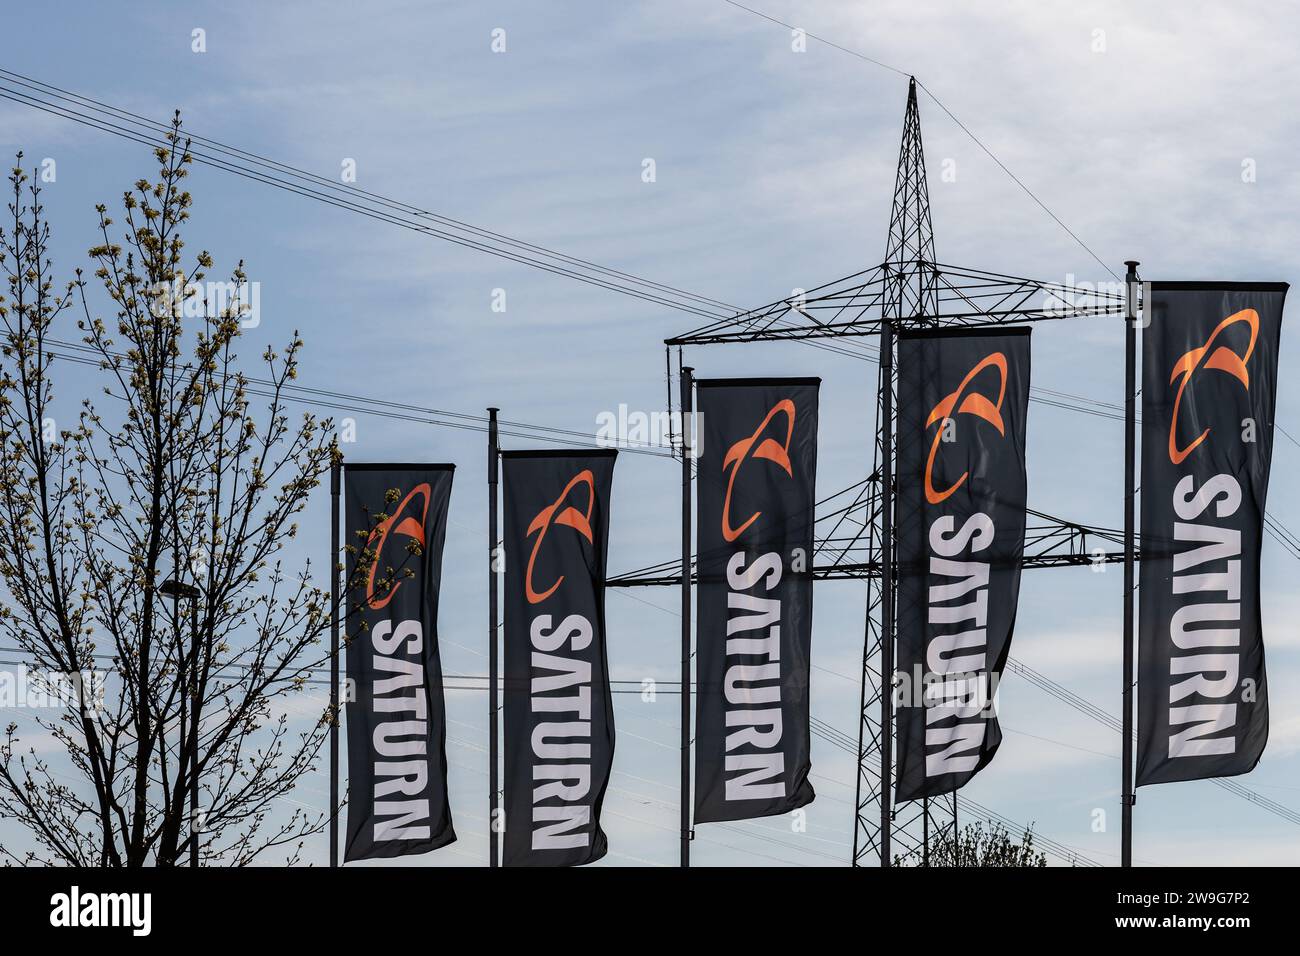 Koblenz, Germany - April 22, 2021: flags with the logo and lettering of the Saturn media retailer in front of a high voltage pylon Stock Photo